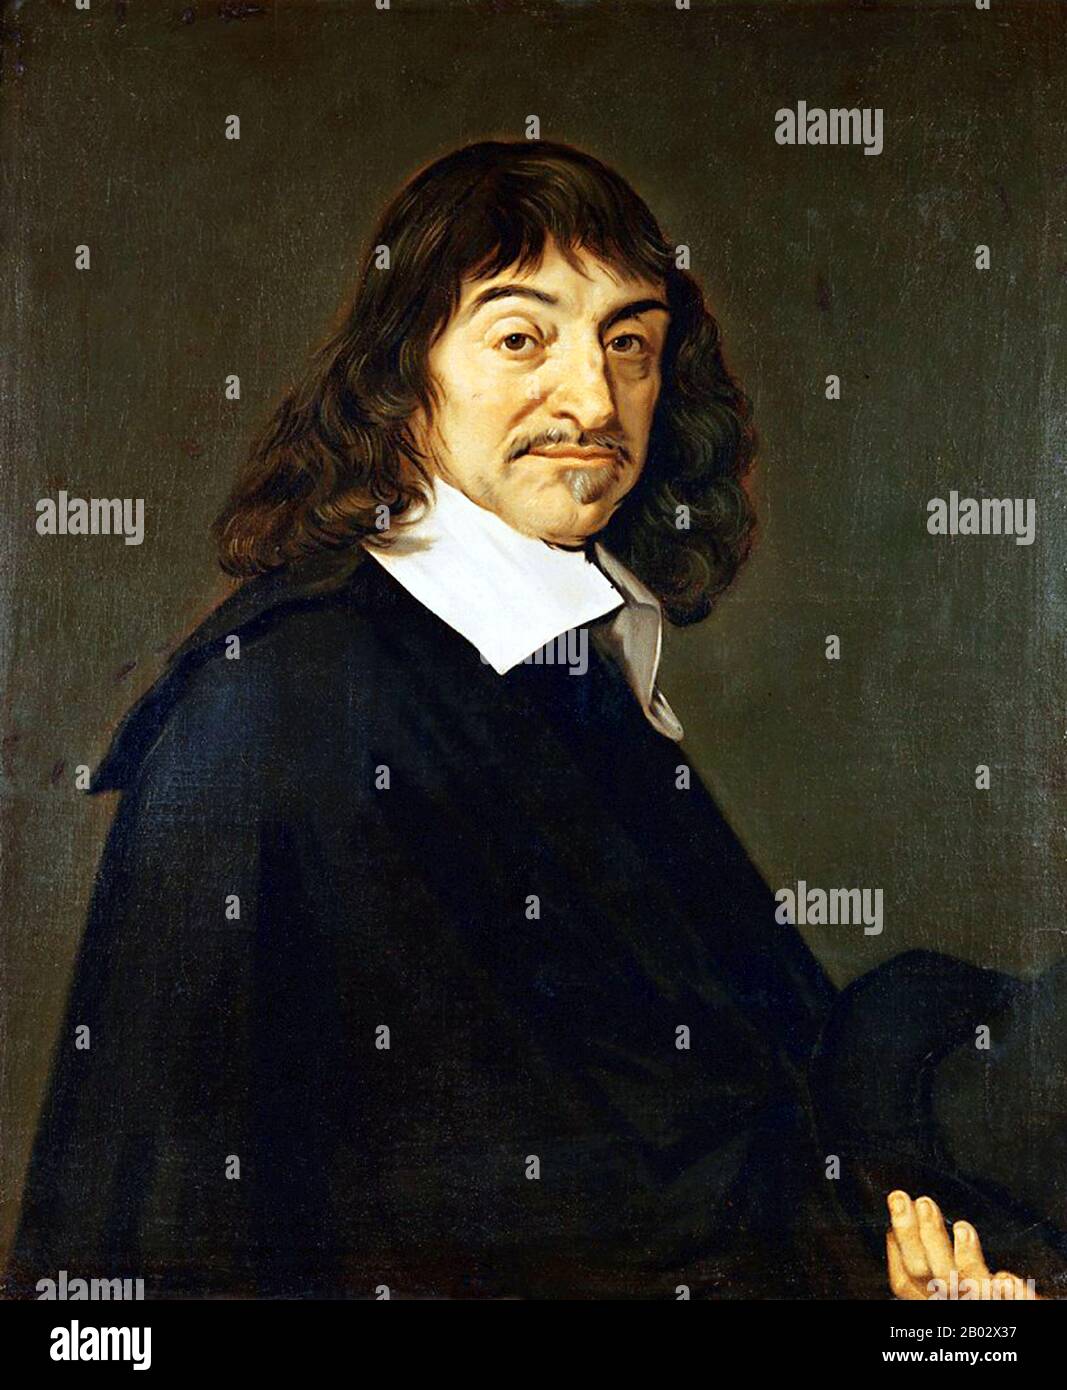 René Descartes ( 31 March 1596 – 11 February 1650) was a French philosopher, mathematician and scientist who spent most of his life in the Dutch Republic.  He has been dubbed the father of modern philosophy, and much subsequent Western philosophy is a response to his writings, which are studied closely to this day. In particular, his Meditations on First Philosophy continues to be a standard text at most university philosophy departments. Descartes' influence in mathematics is equally apparent; the Cartesian coordinate system — allowing reference to a point in space as a set of numbers, and al Stock Photo